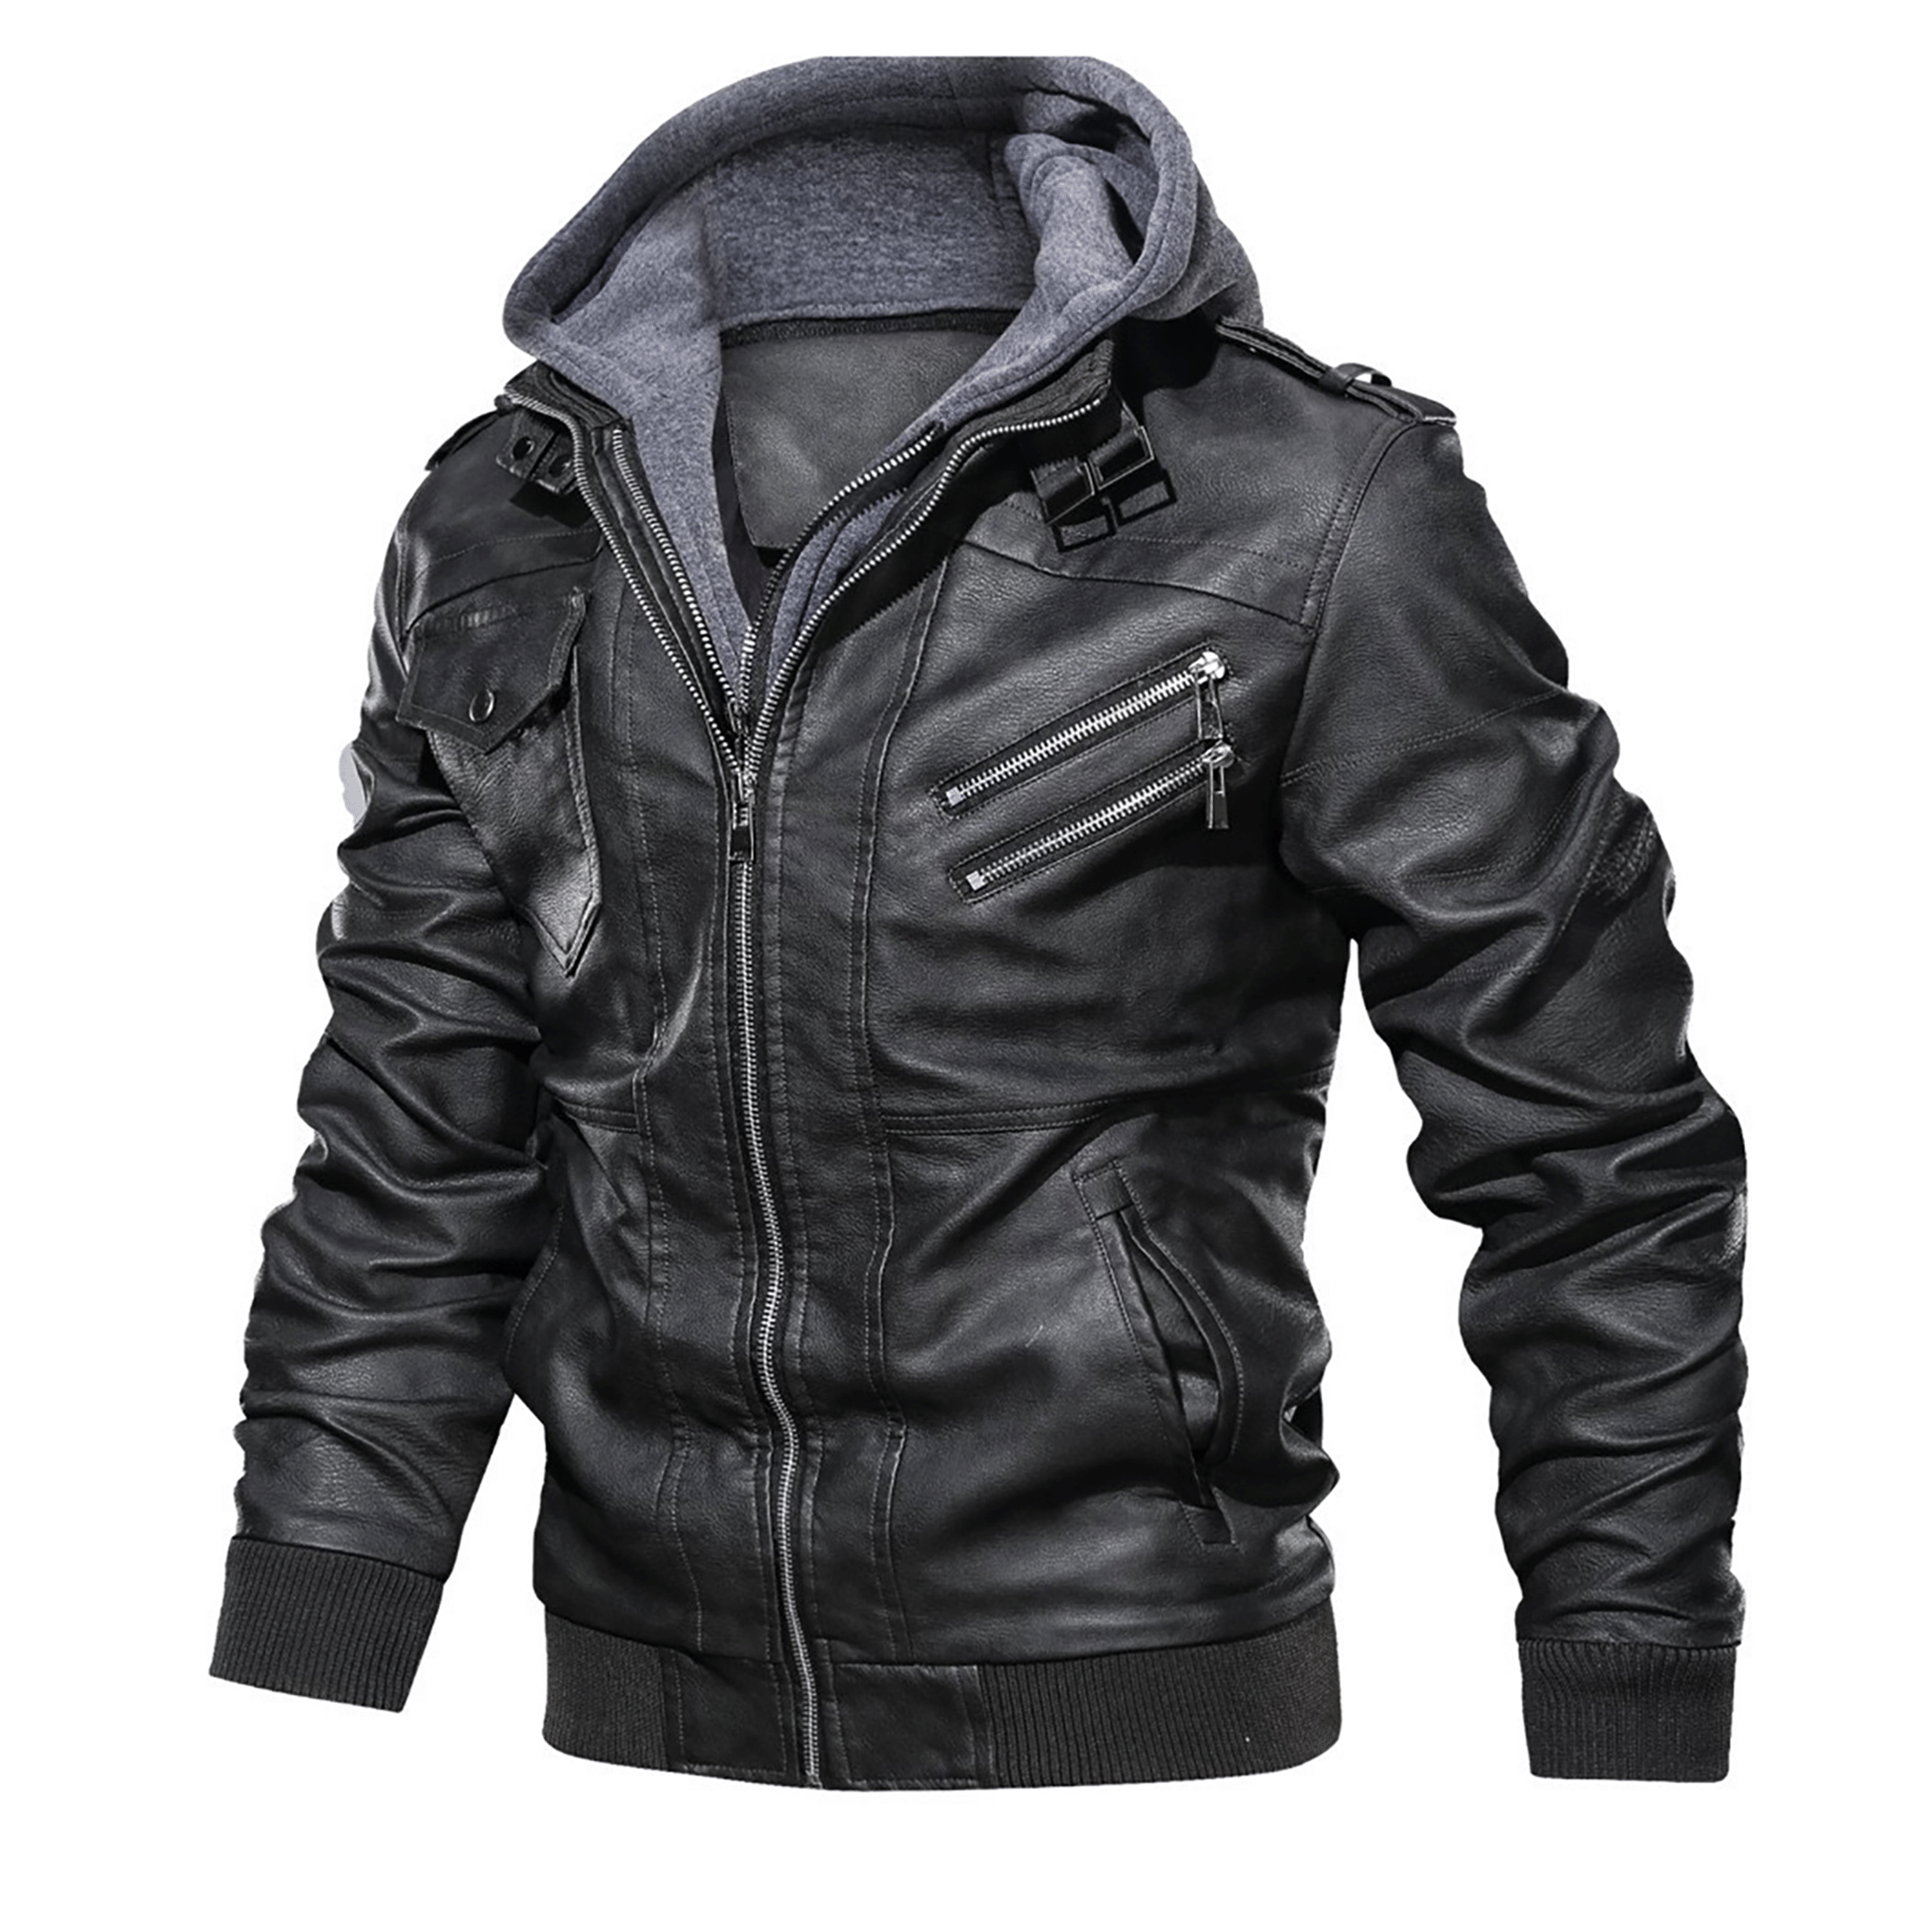 Top leather jackets and latest products 327